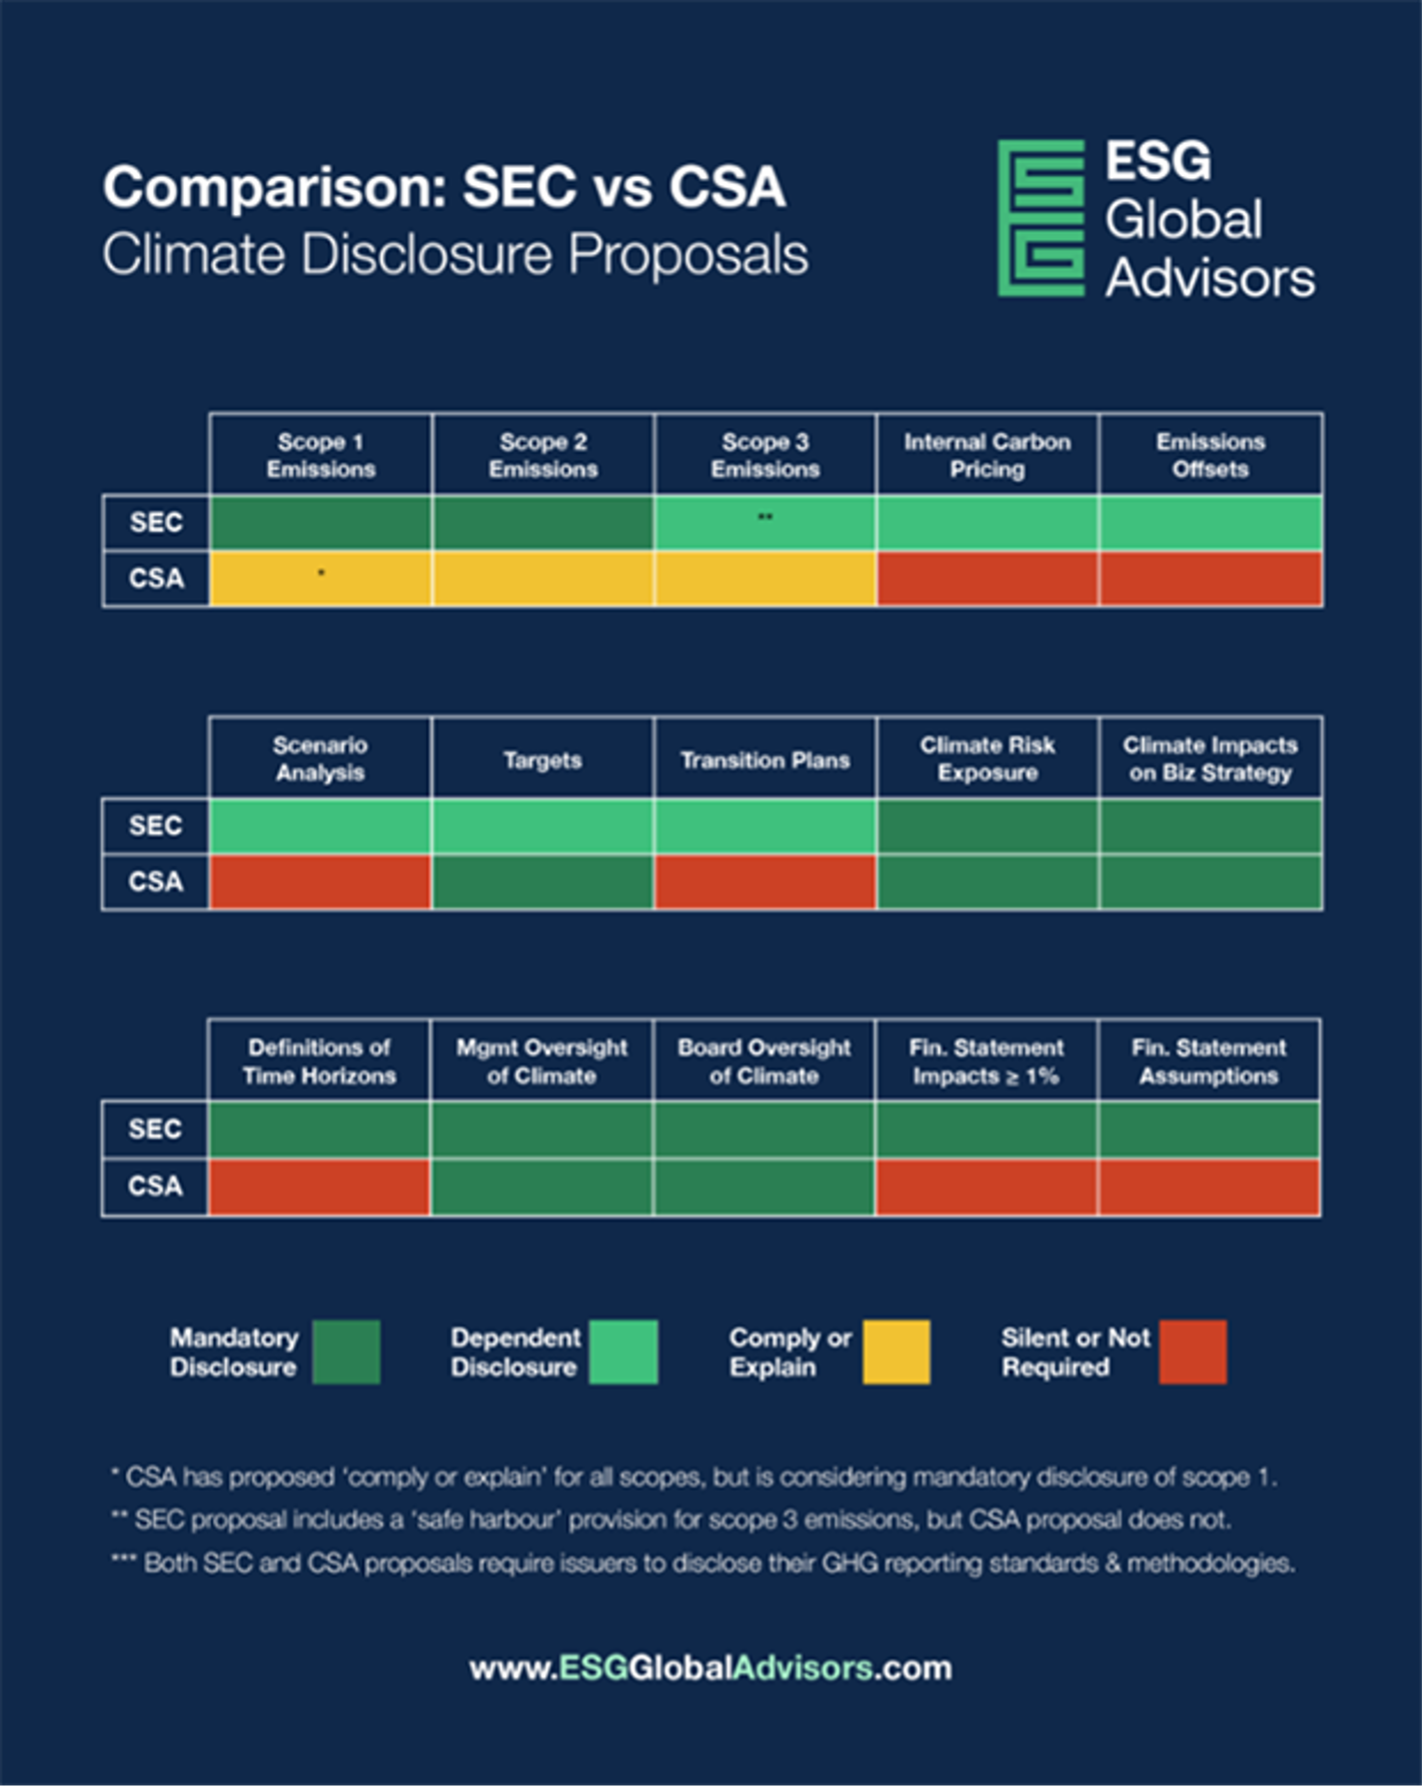 An infographic showing a comparison between SEC and CSA